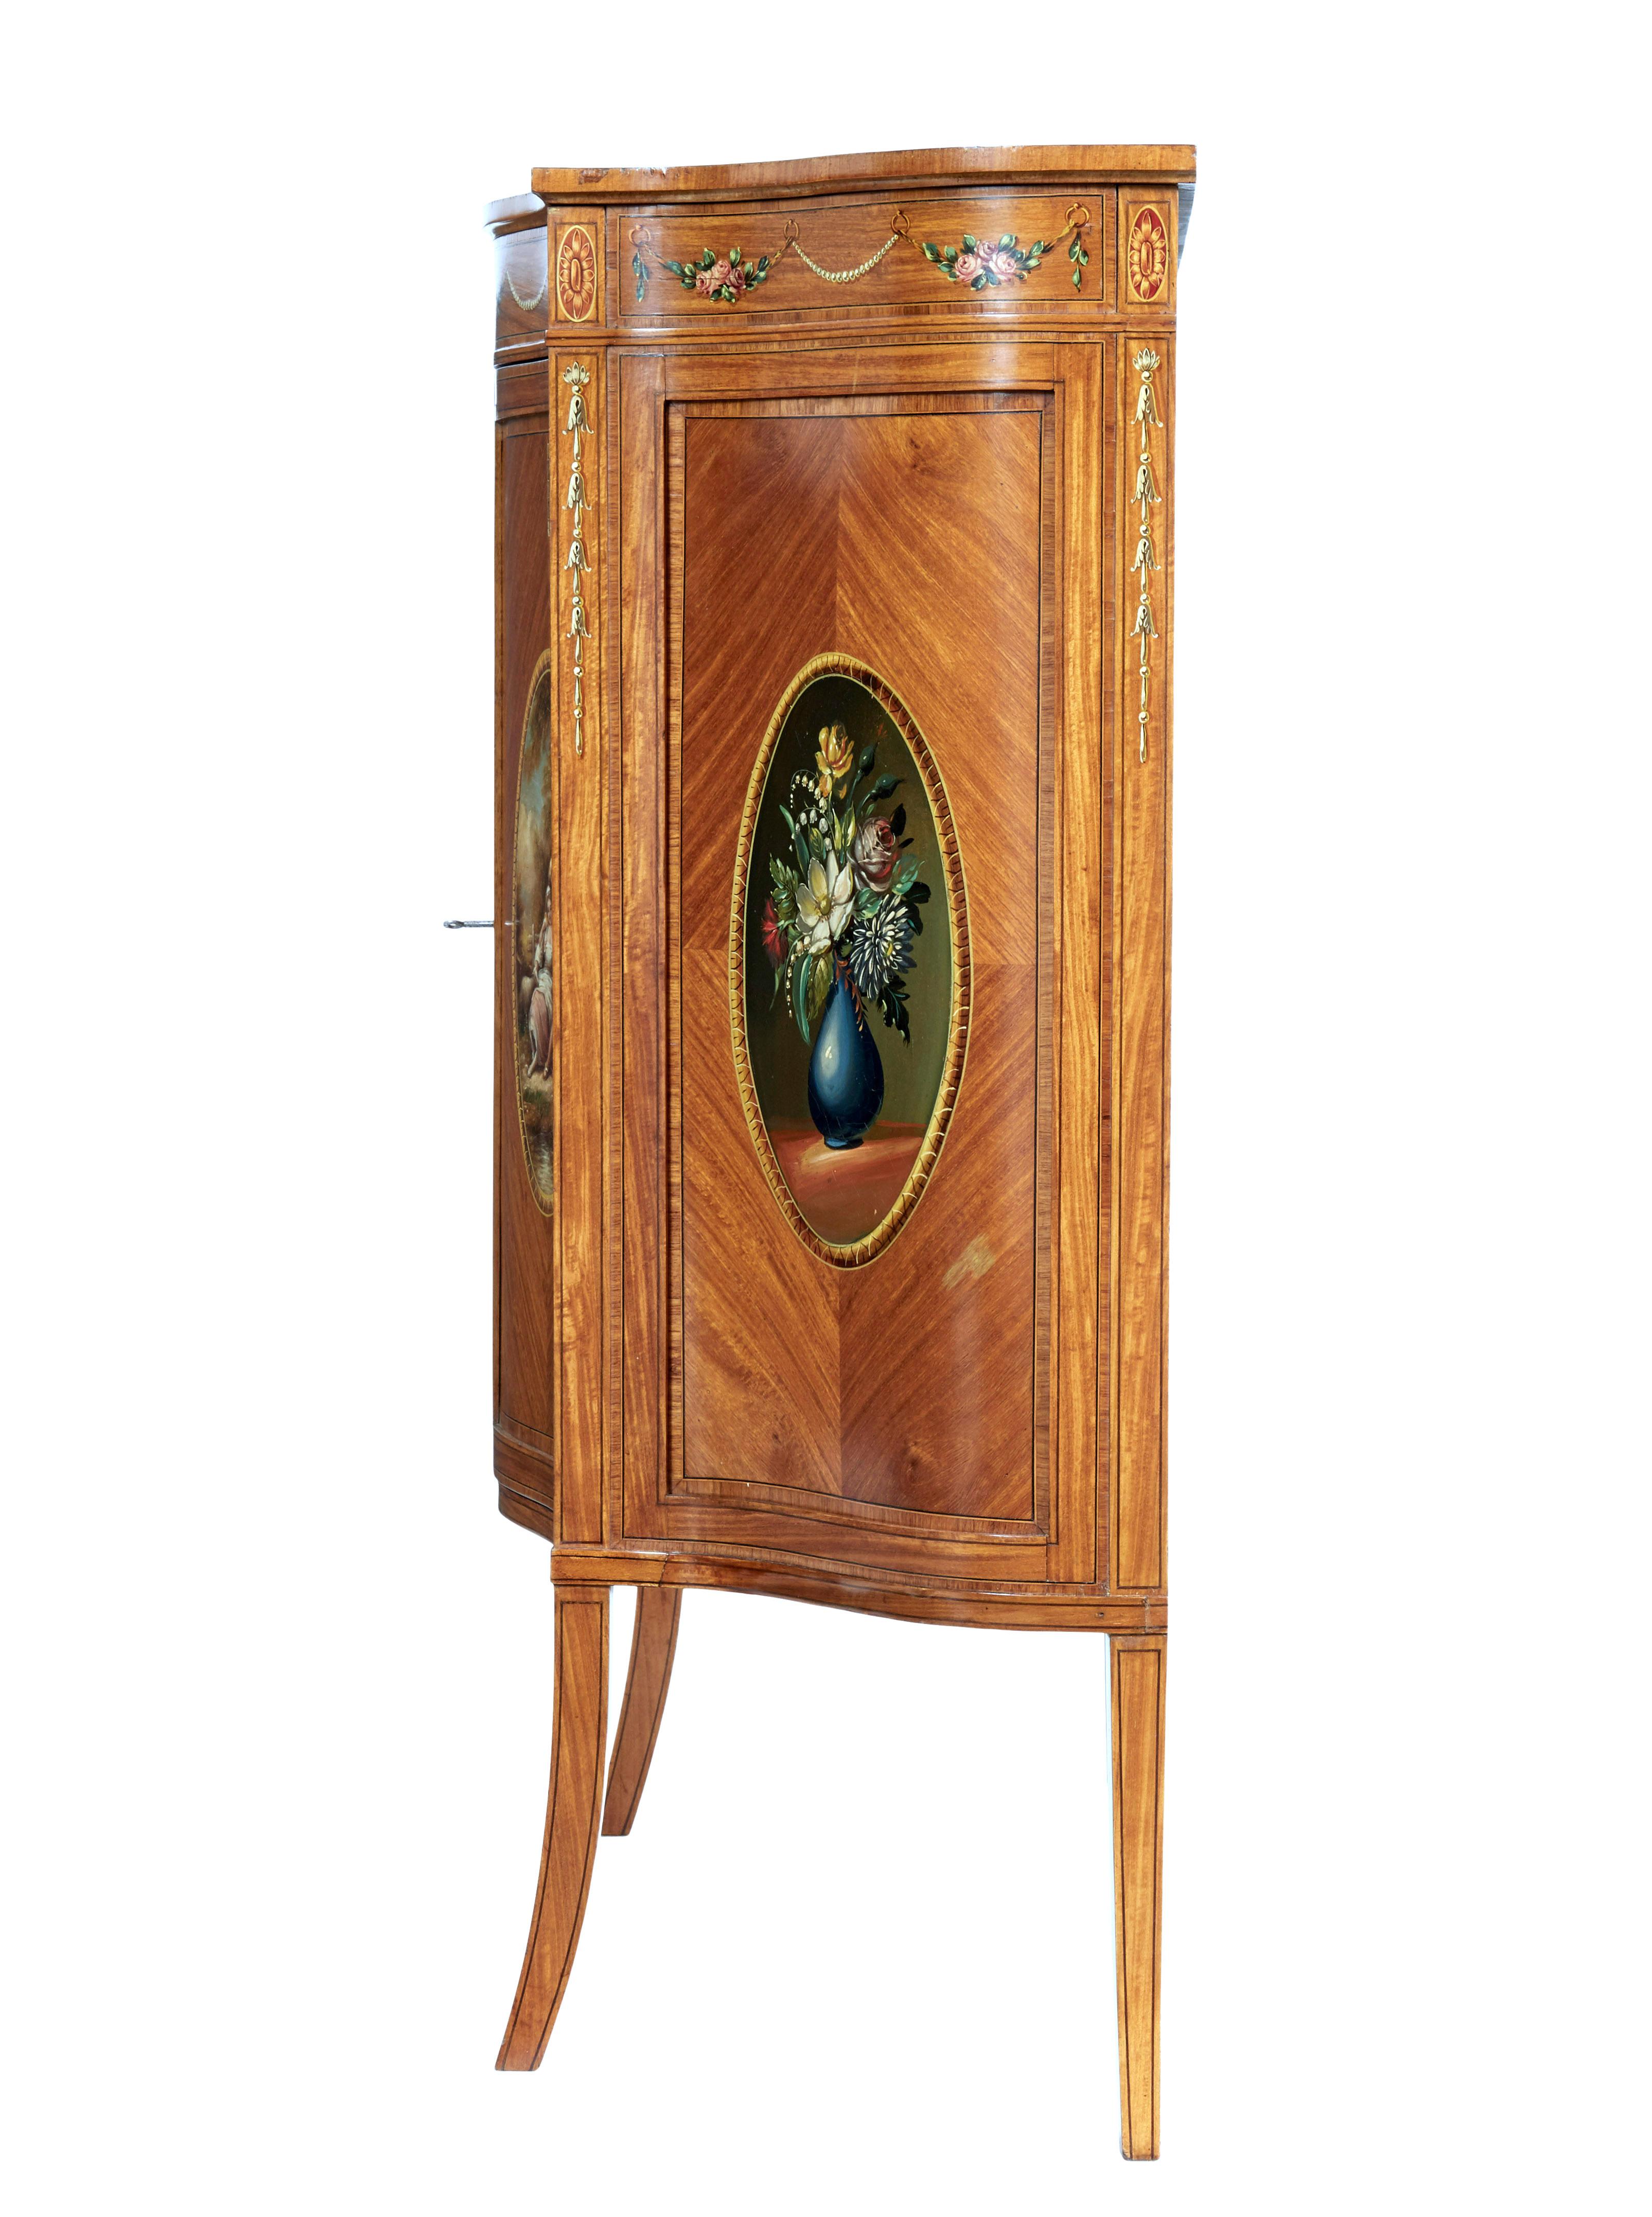 English Late 19th Century Sheraton Revival Satinwood Inlaid and Painted Cabinet For Sale